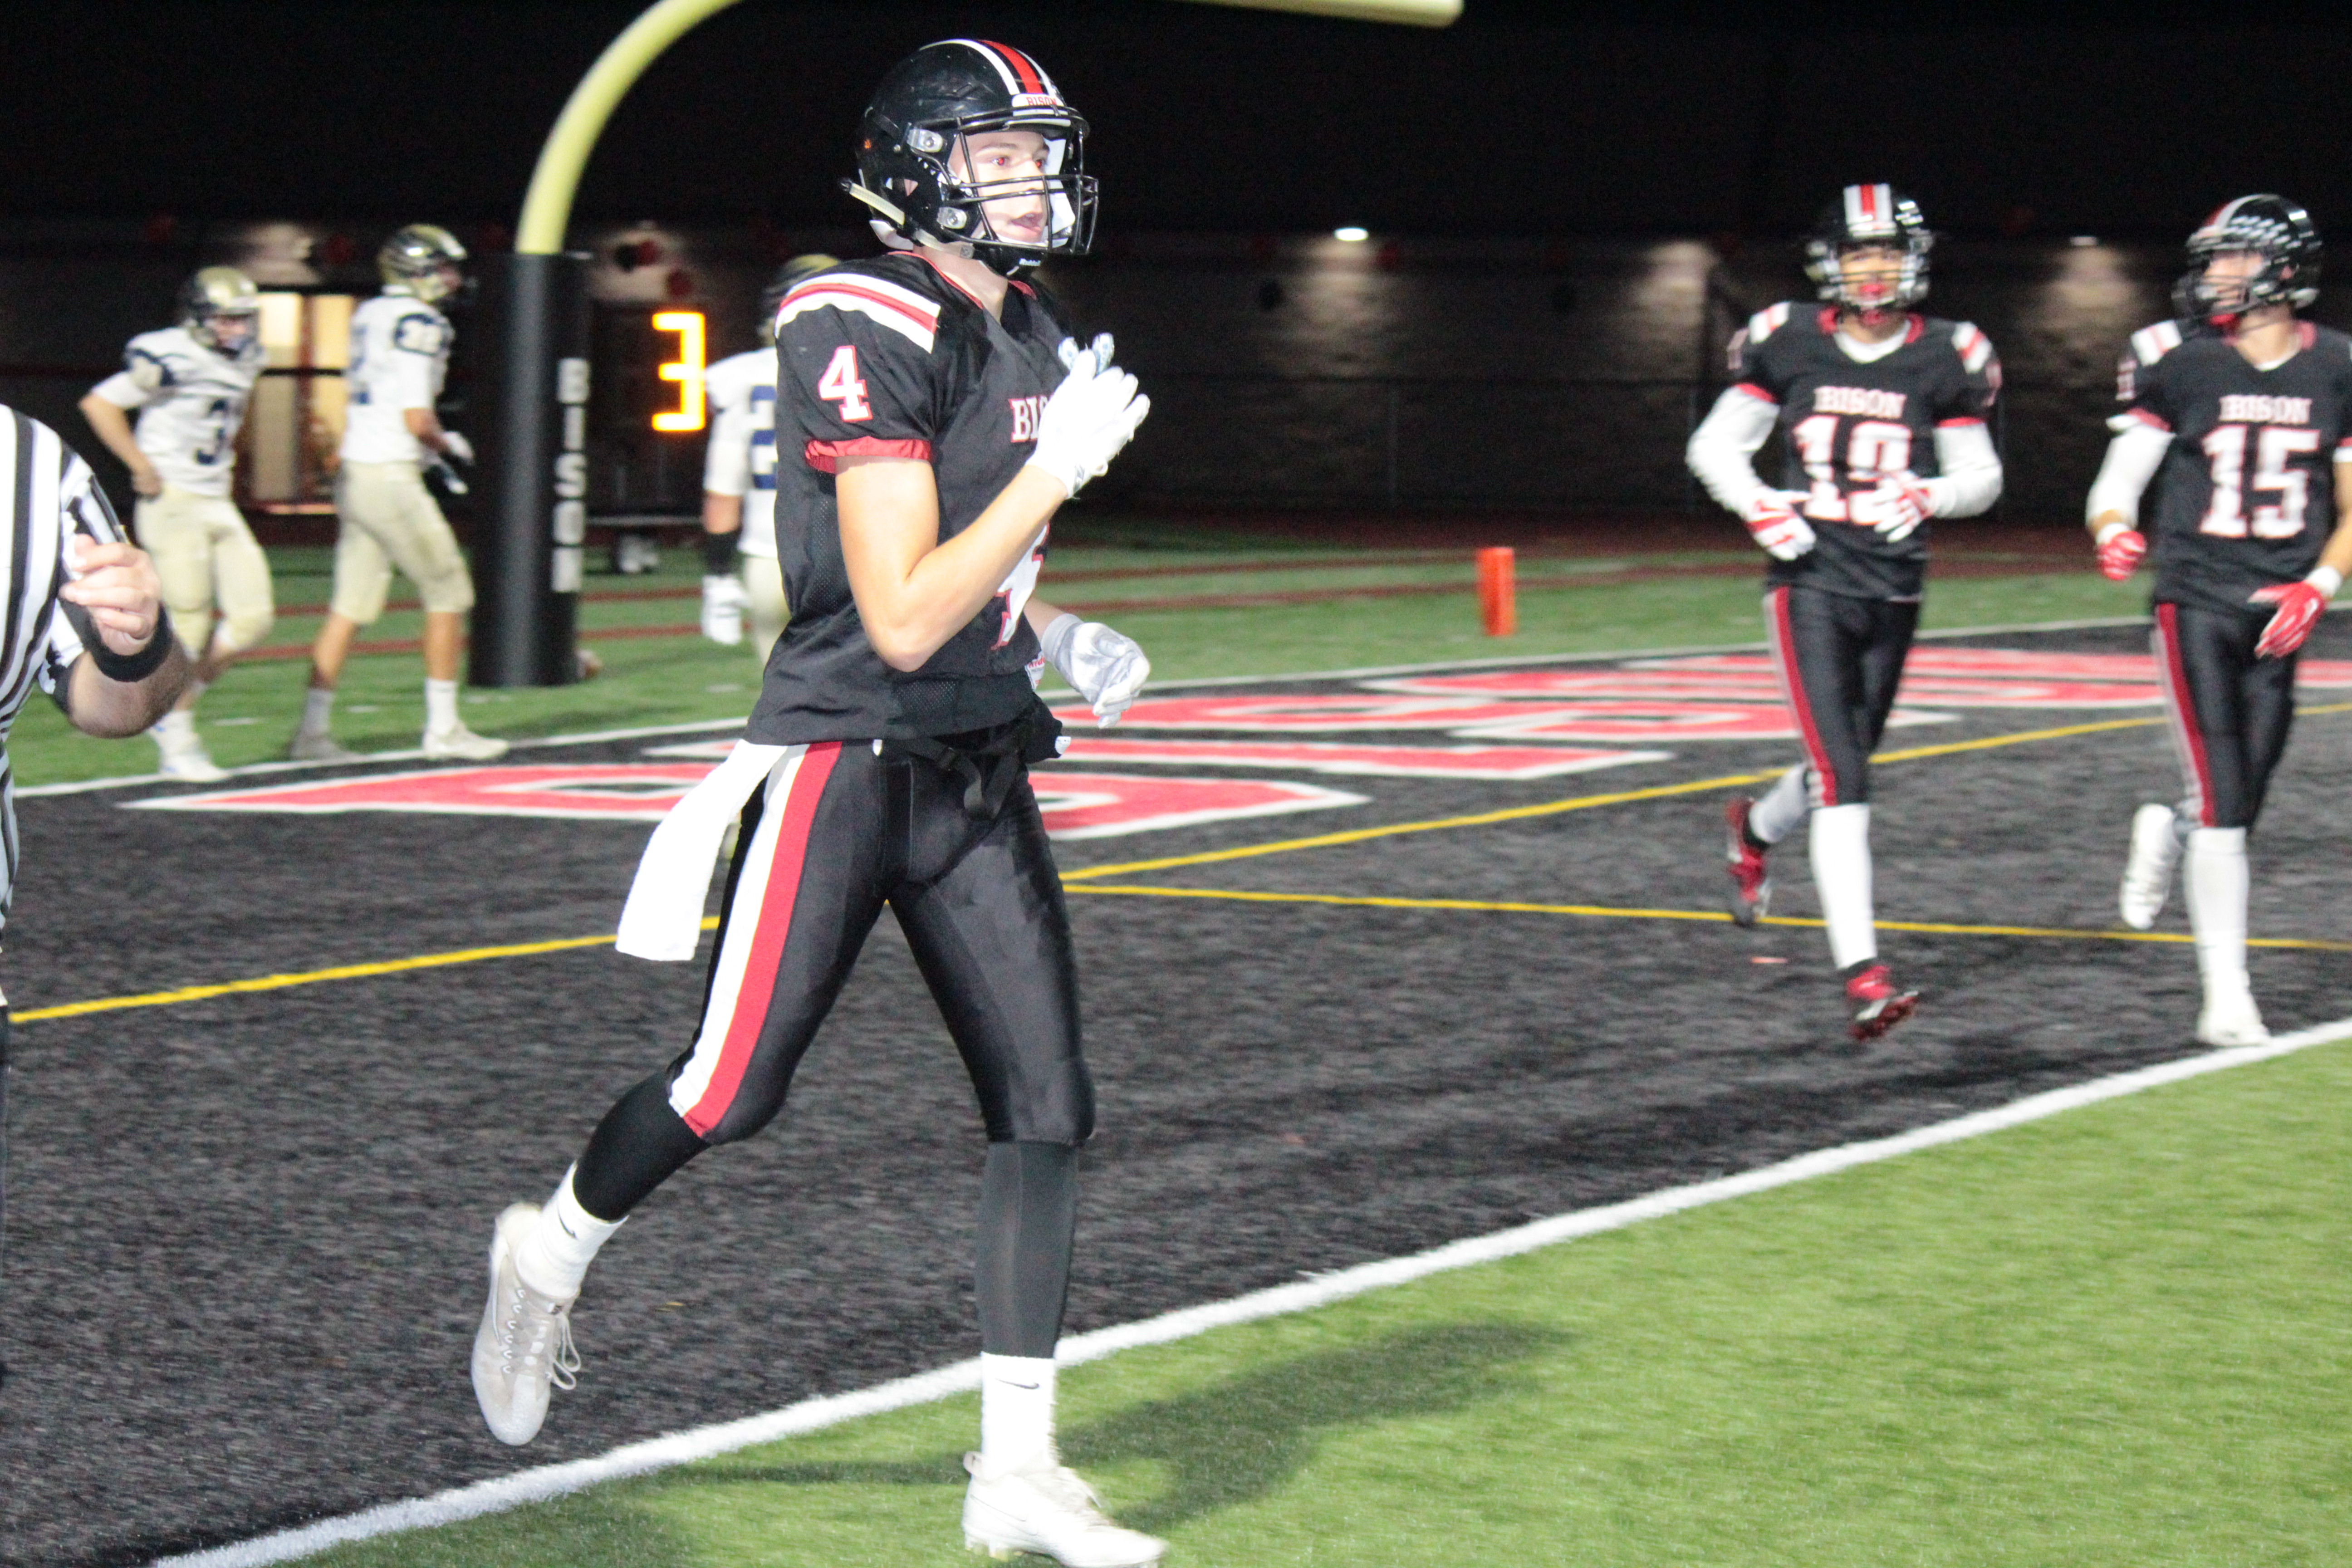 Jacob Lezzer (4) had a big night for Clearfield, catching 7 passes for 97 yards and a pair of touchdowns.